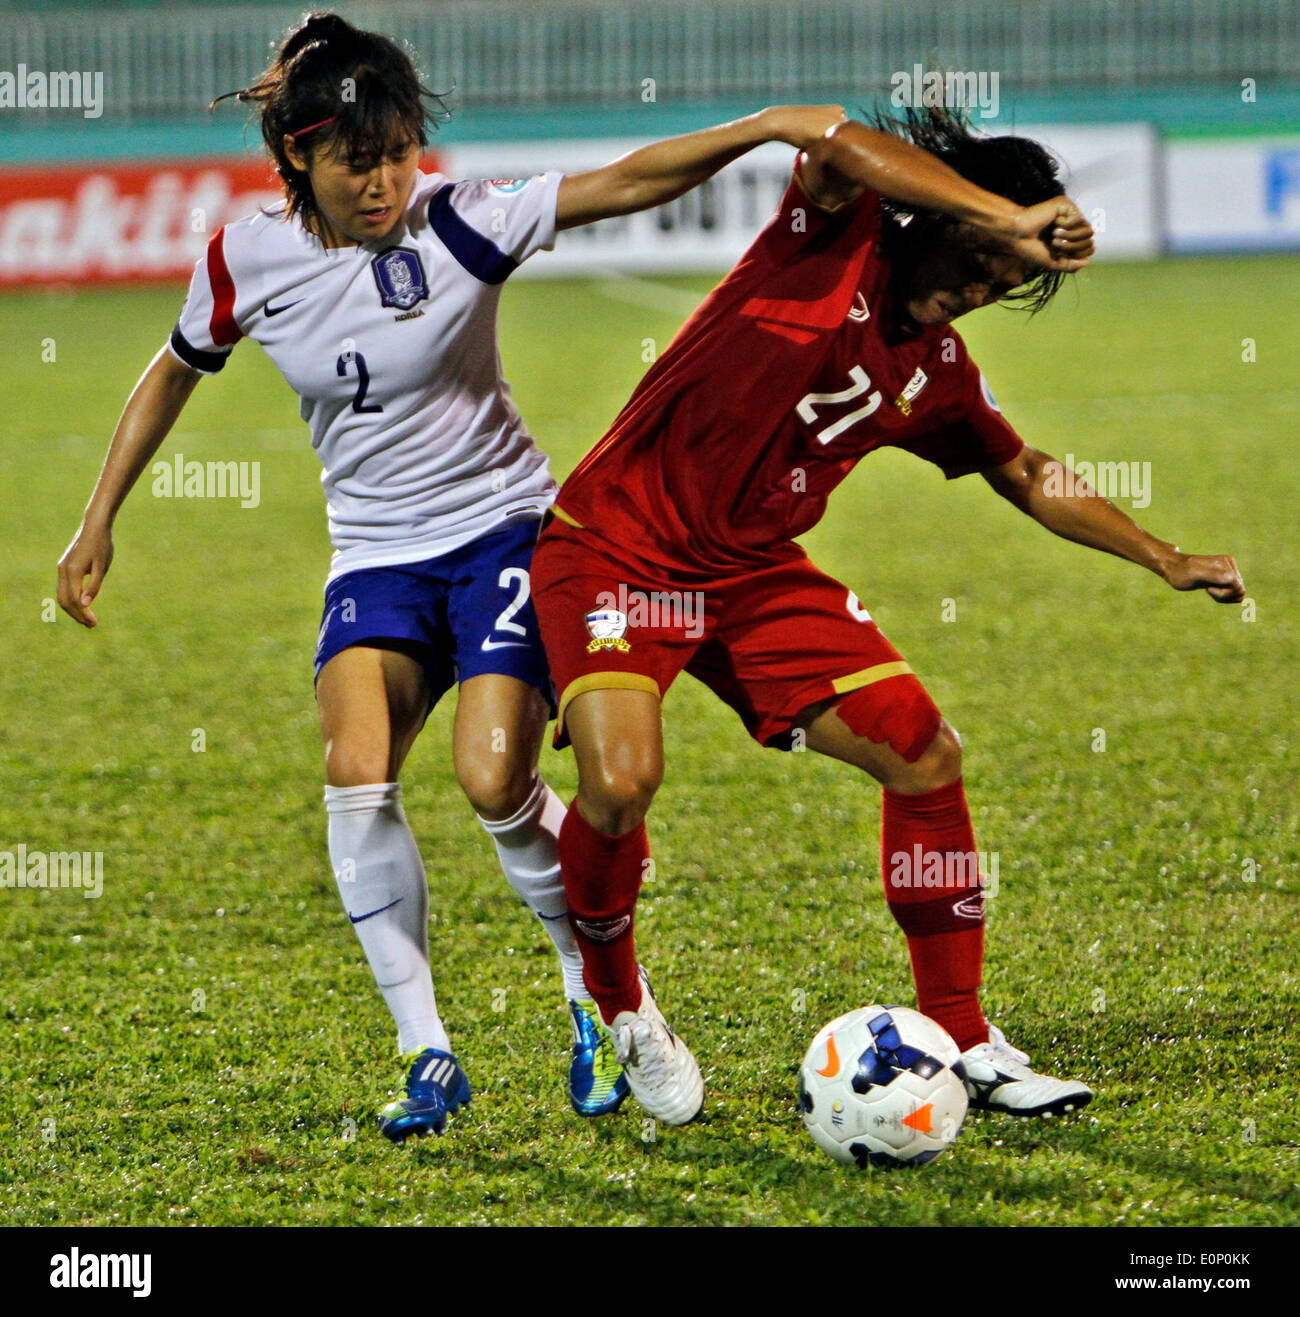 Ho Chi Minh, Vietnam. 17th May, 2014. Seo Hyunsook (L) of South Korea vies for the ball during the Group B match against Thailand at the 2014 Women's AFC Cup held at Thong Nhat Stadium in Ho Chi Minh city, Vietnam, May 17, 2014. South Korea advance to World Cup after beating Thailand 4-0. Credit:  Nguyen Le Huyen/Xinhua/Alamy Live News Stock Photo